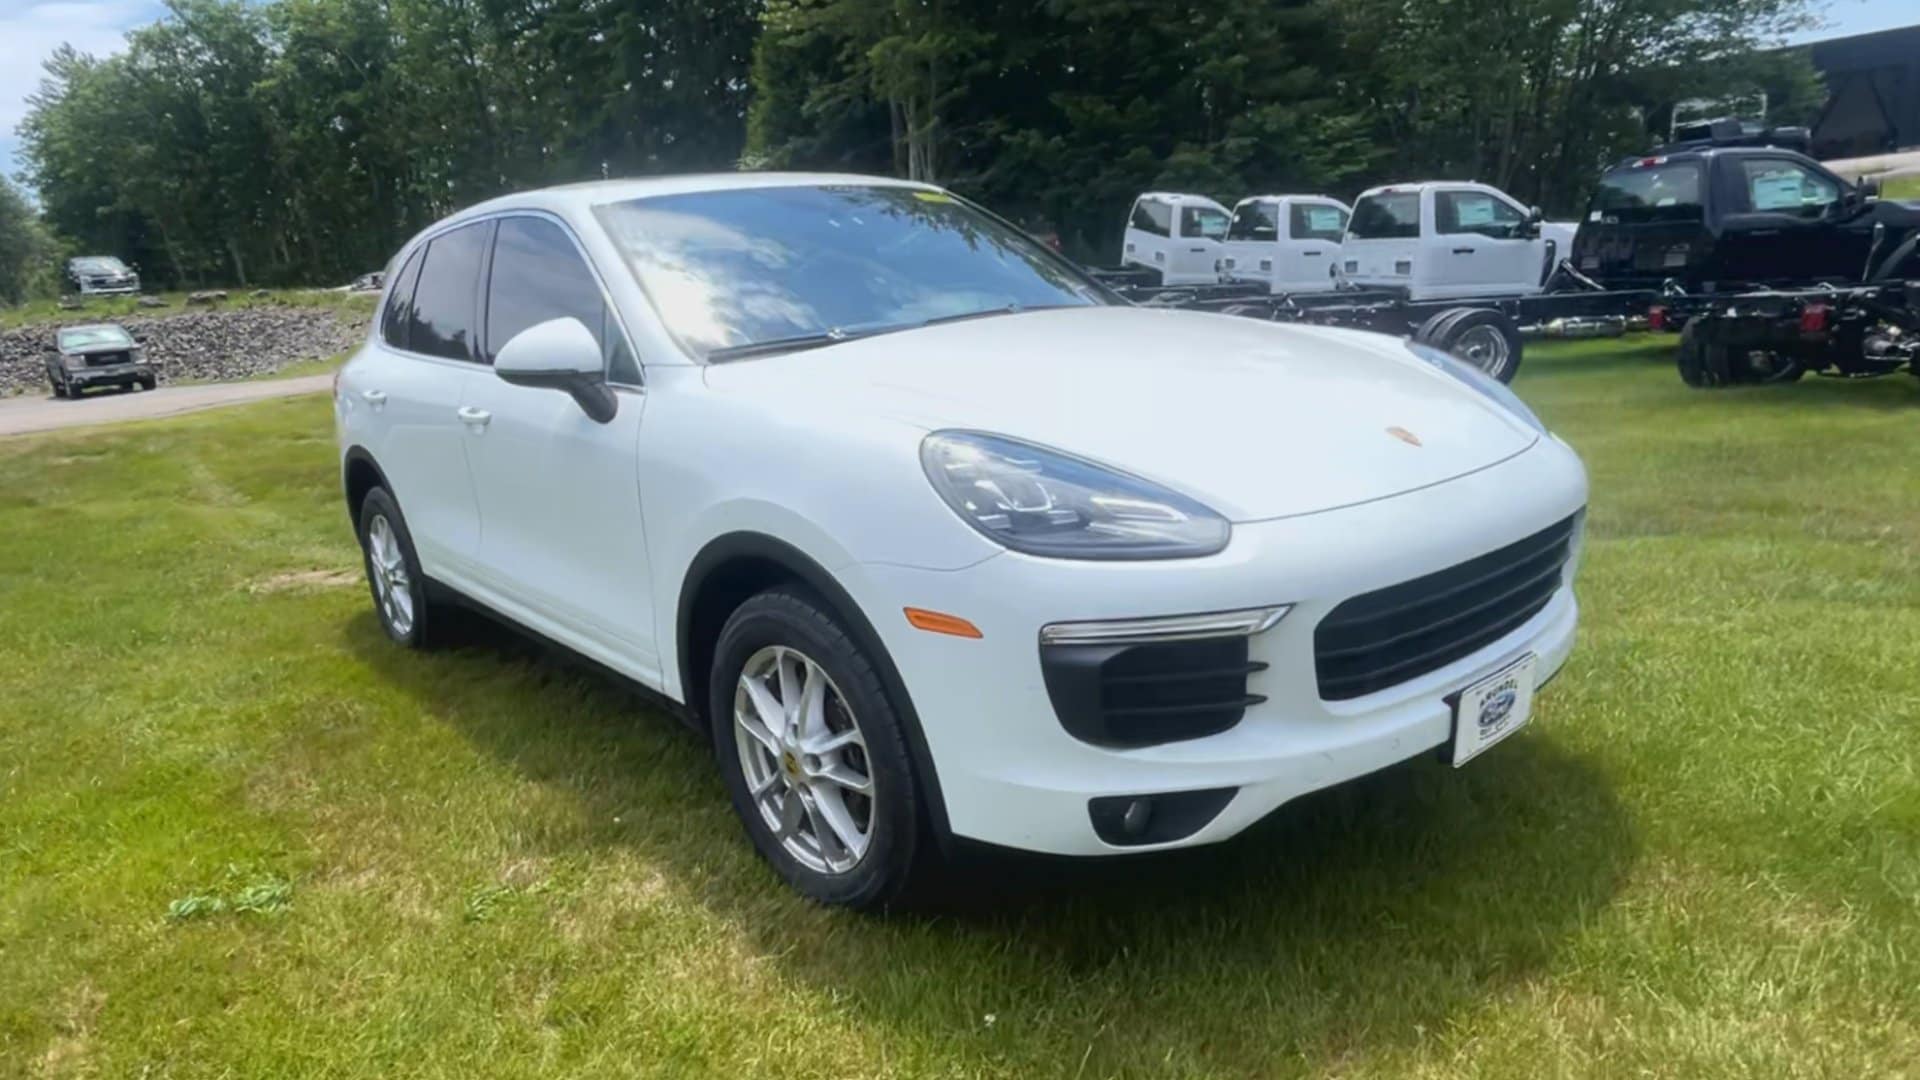 Used 2016 Porsche Cayenne Base with VIN WP1AA2A2XGKA08052 for sale in Arundel, ME